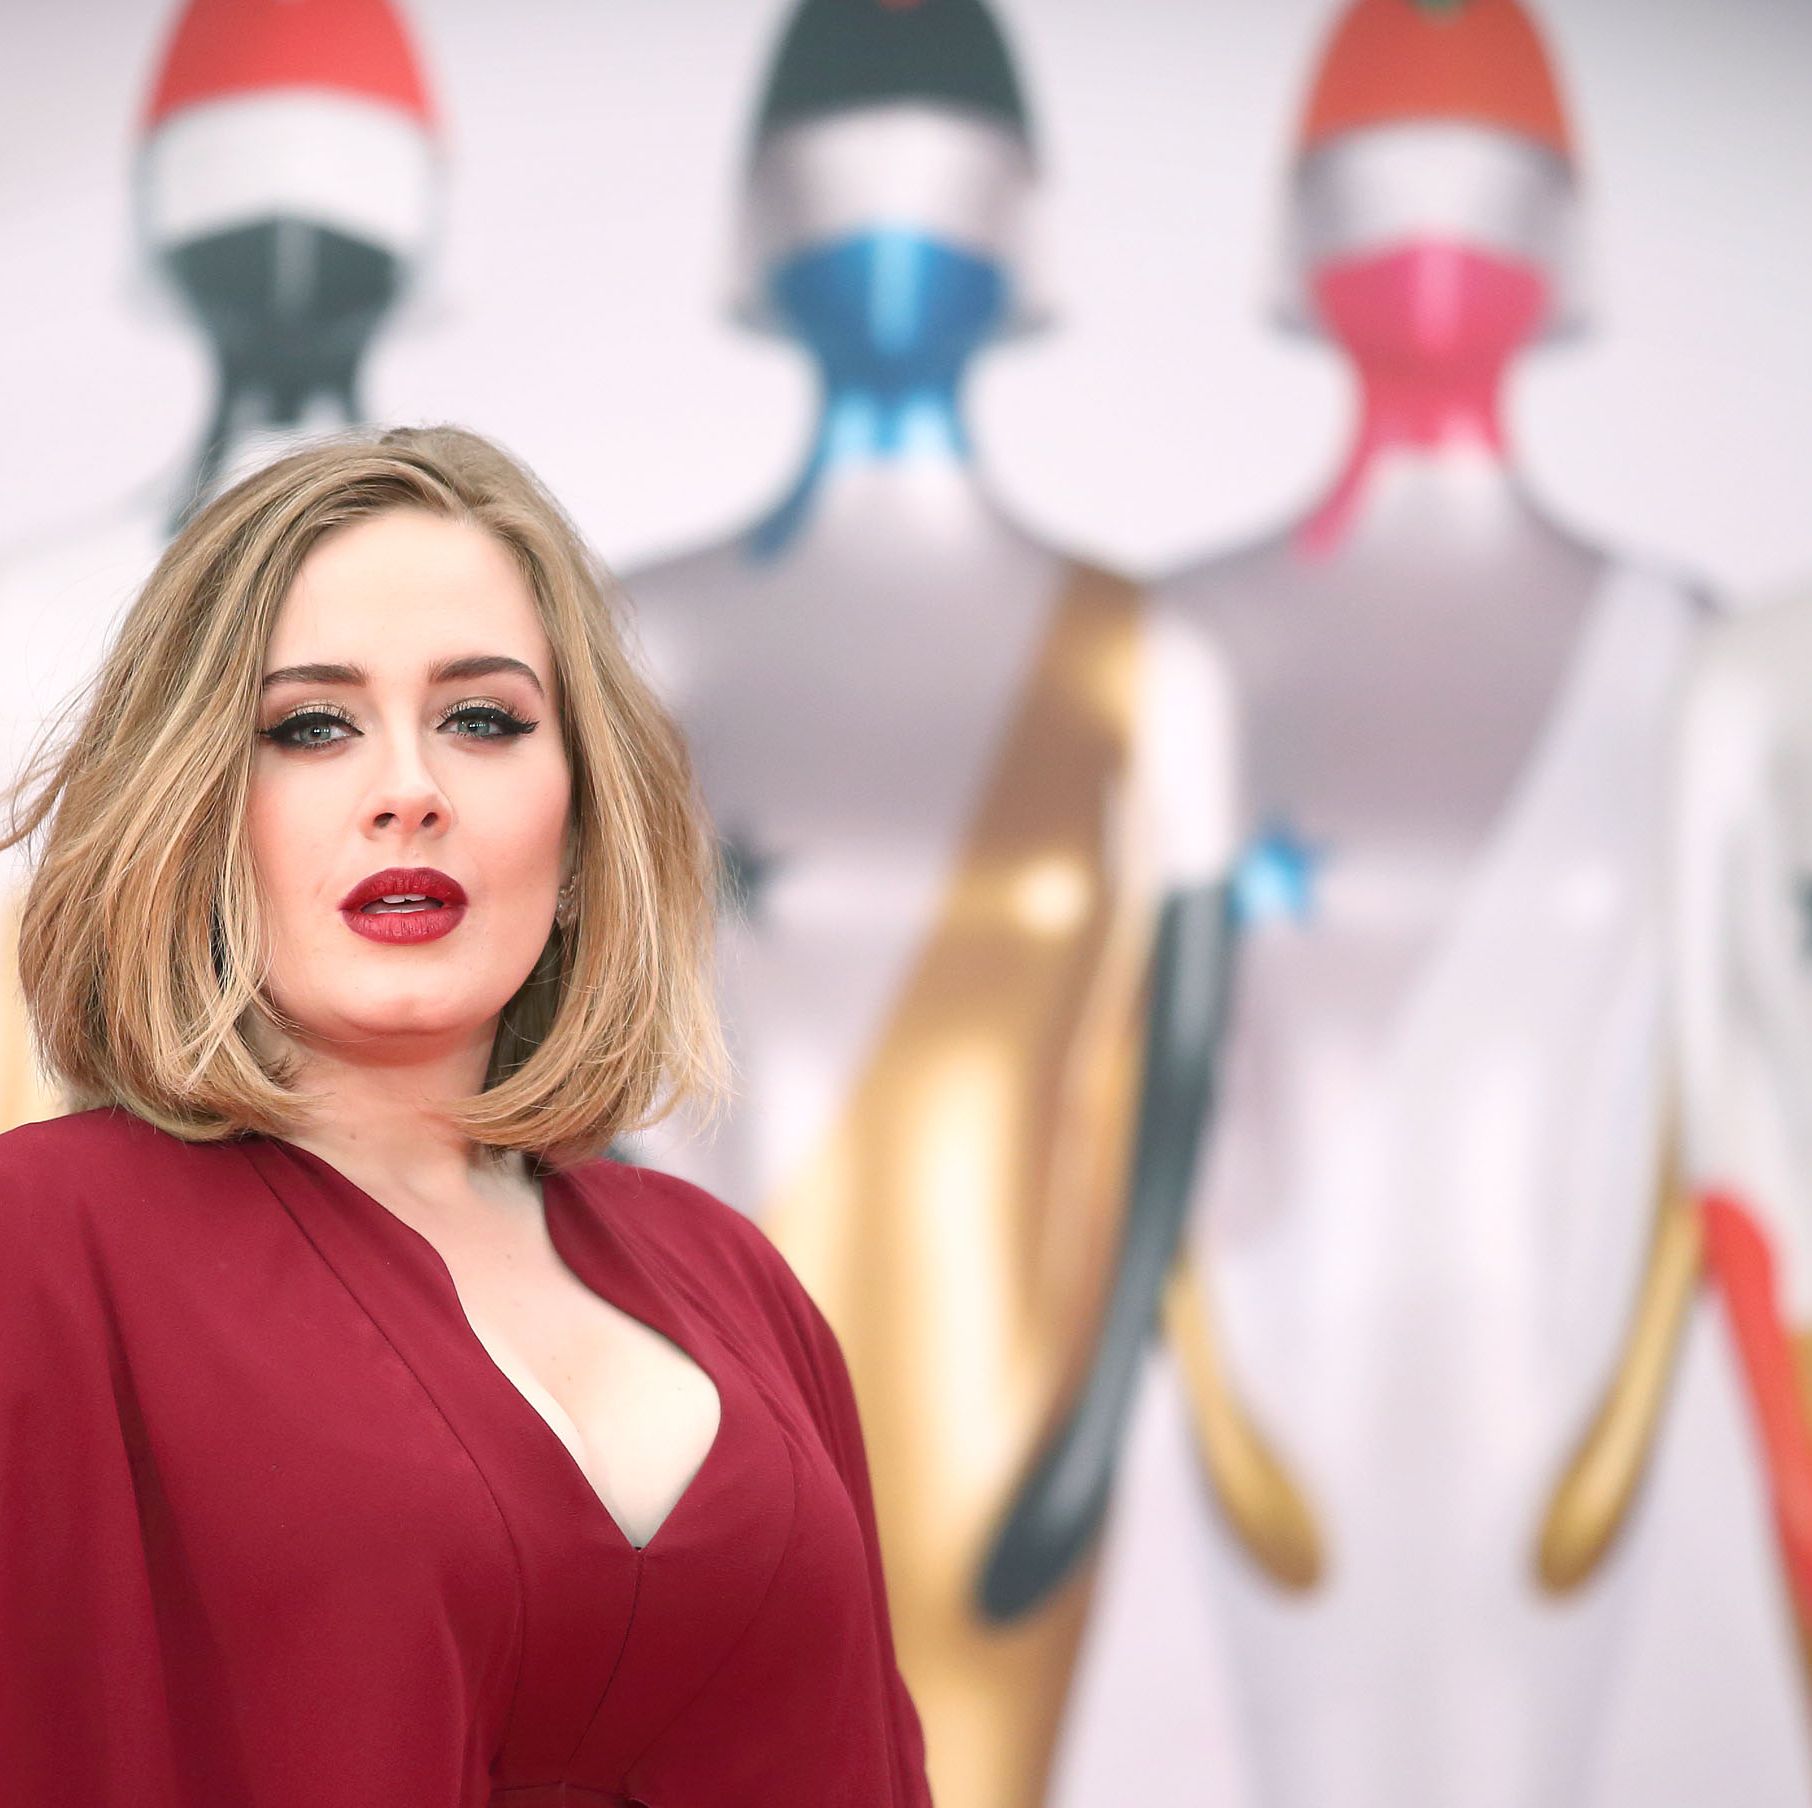 https://hips.hearstapps.com/hmg-prod/images/adele-attends-the-brit-awards-2016-at-the-o2-arena-on-news-photo-1572603995.jpg?crop=0.604xw:0.845xh;0,0.155xh&resize=2048:*